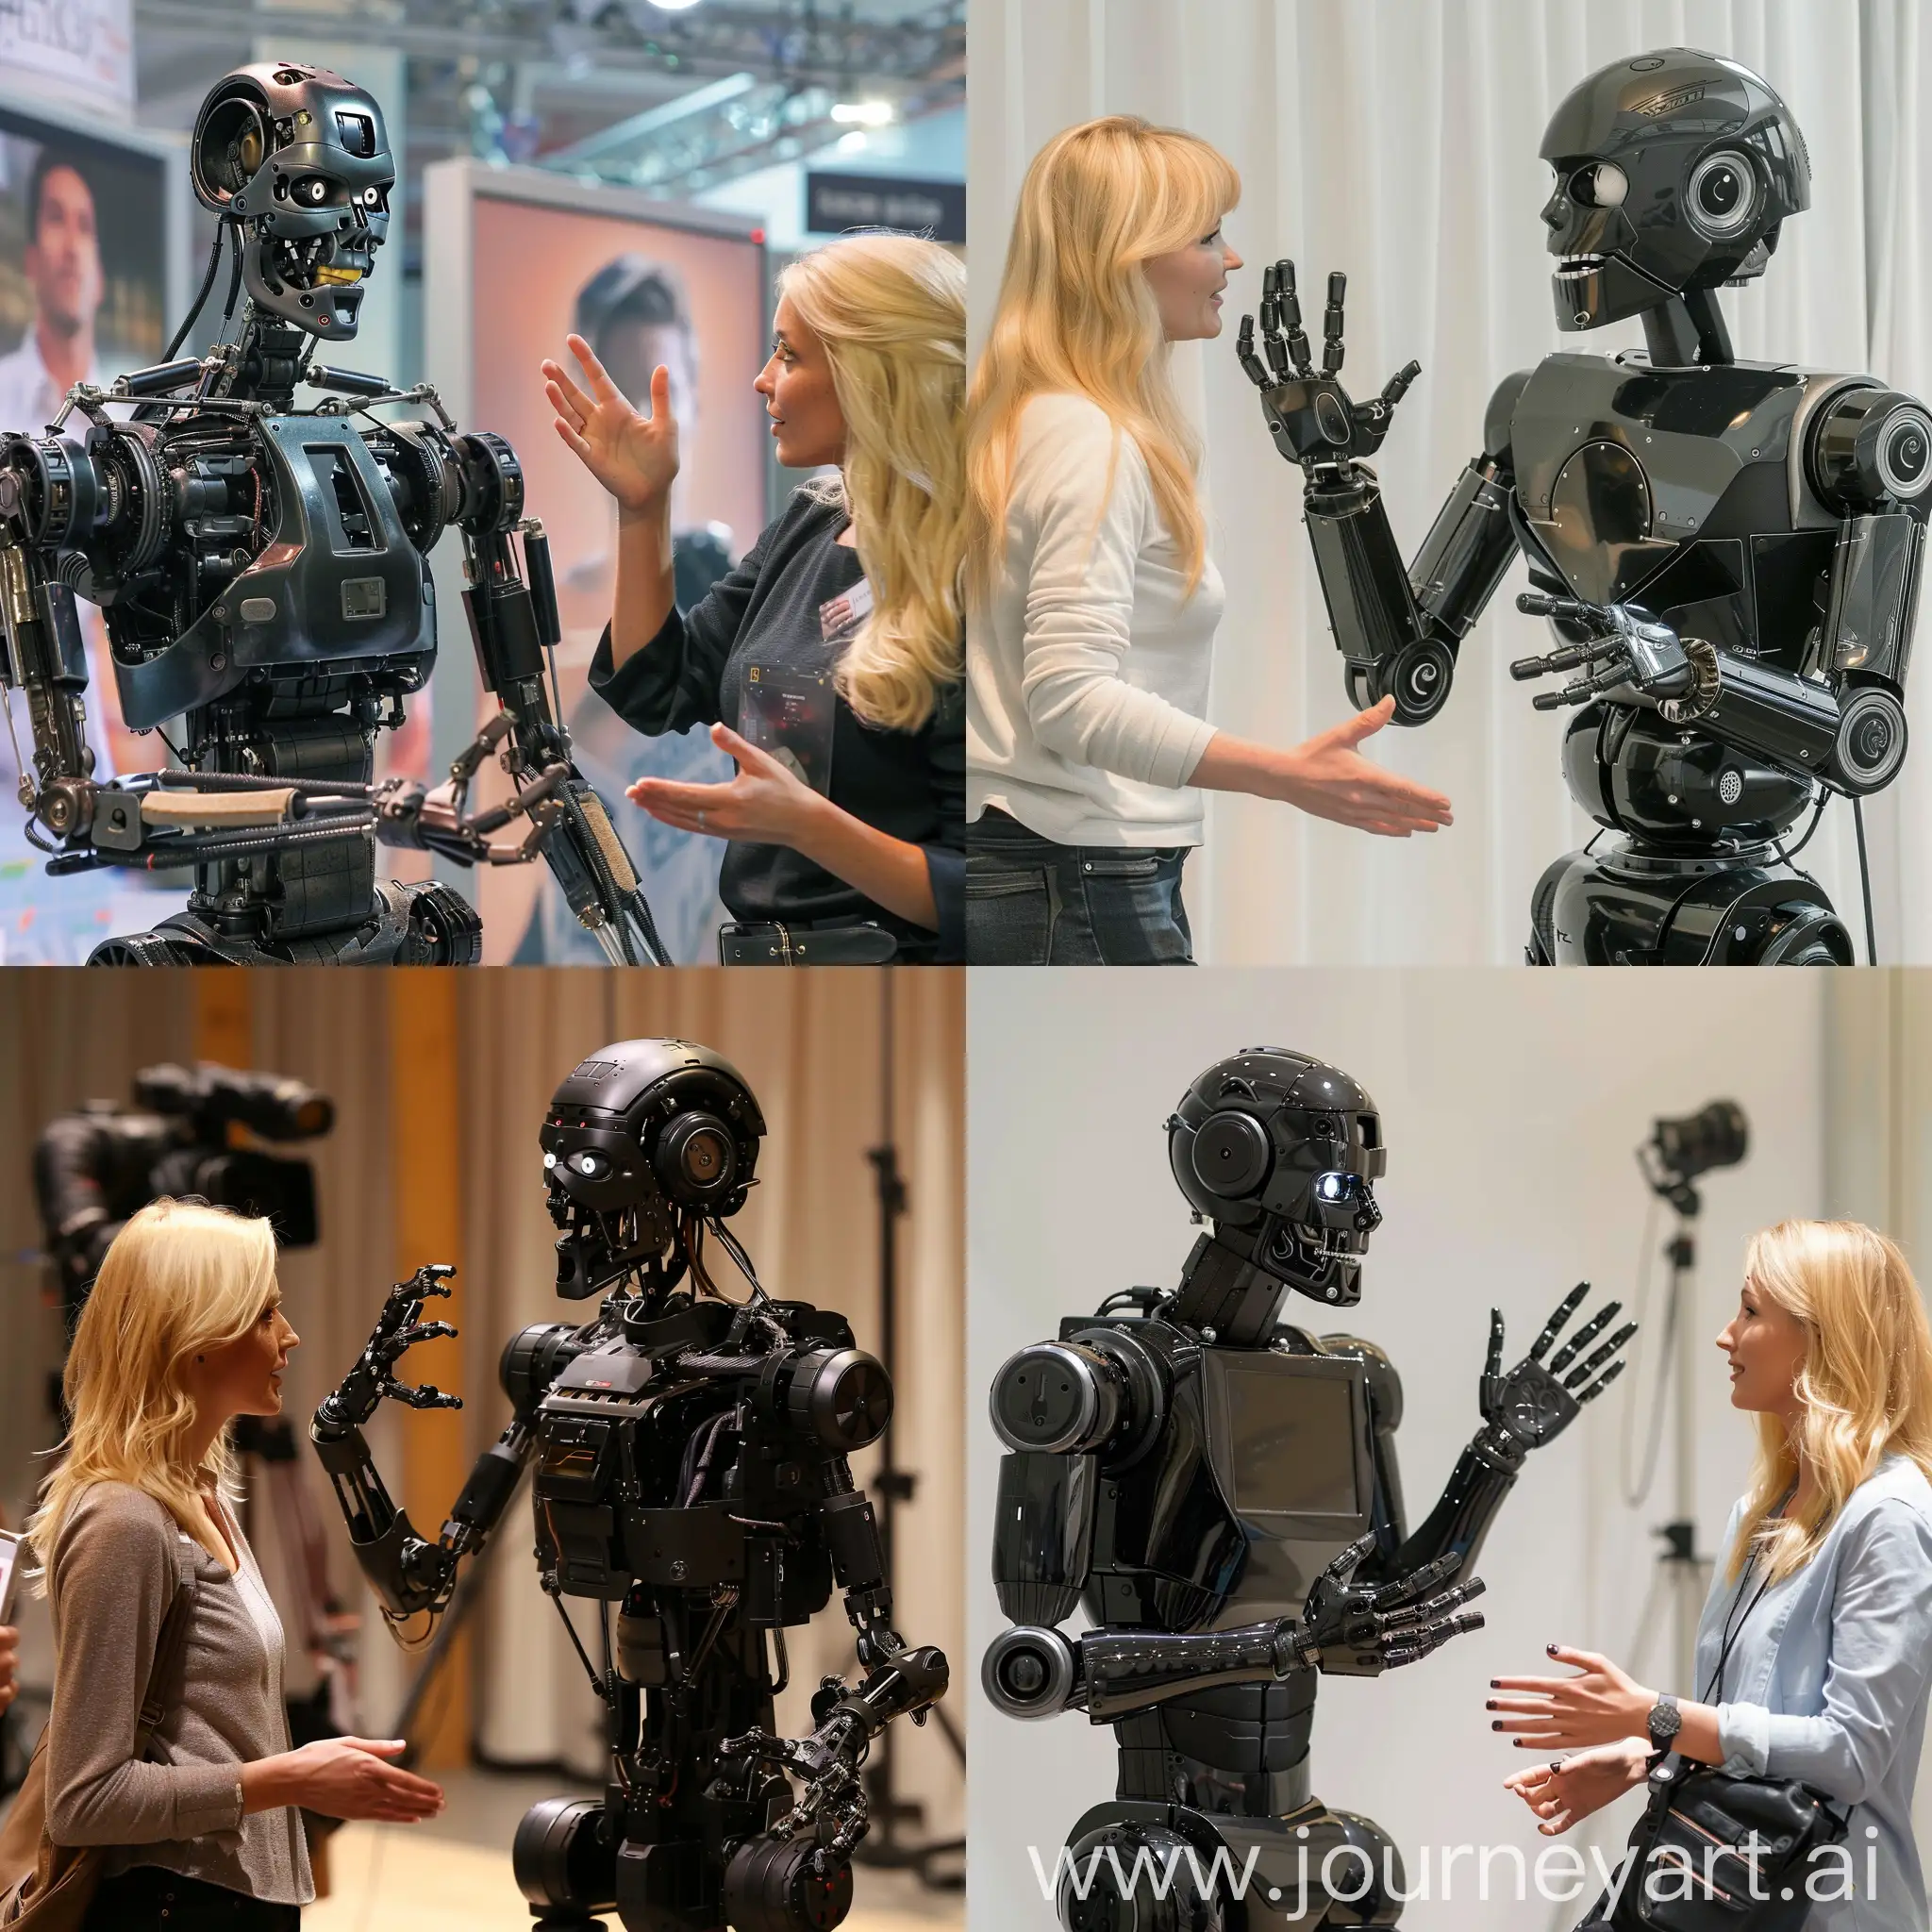 A humanoid robot that looks like a man makes gestures towards a blonde female journalist who interviews him